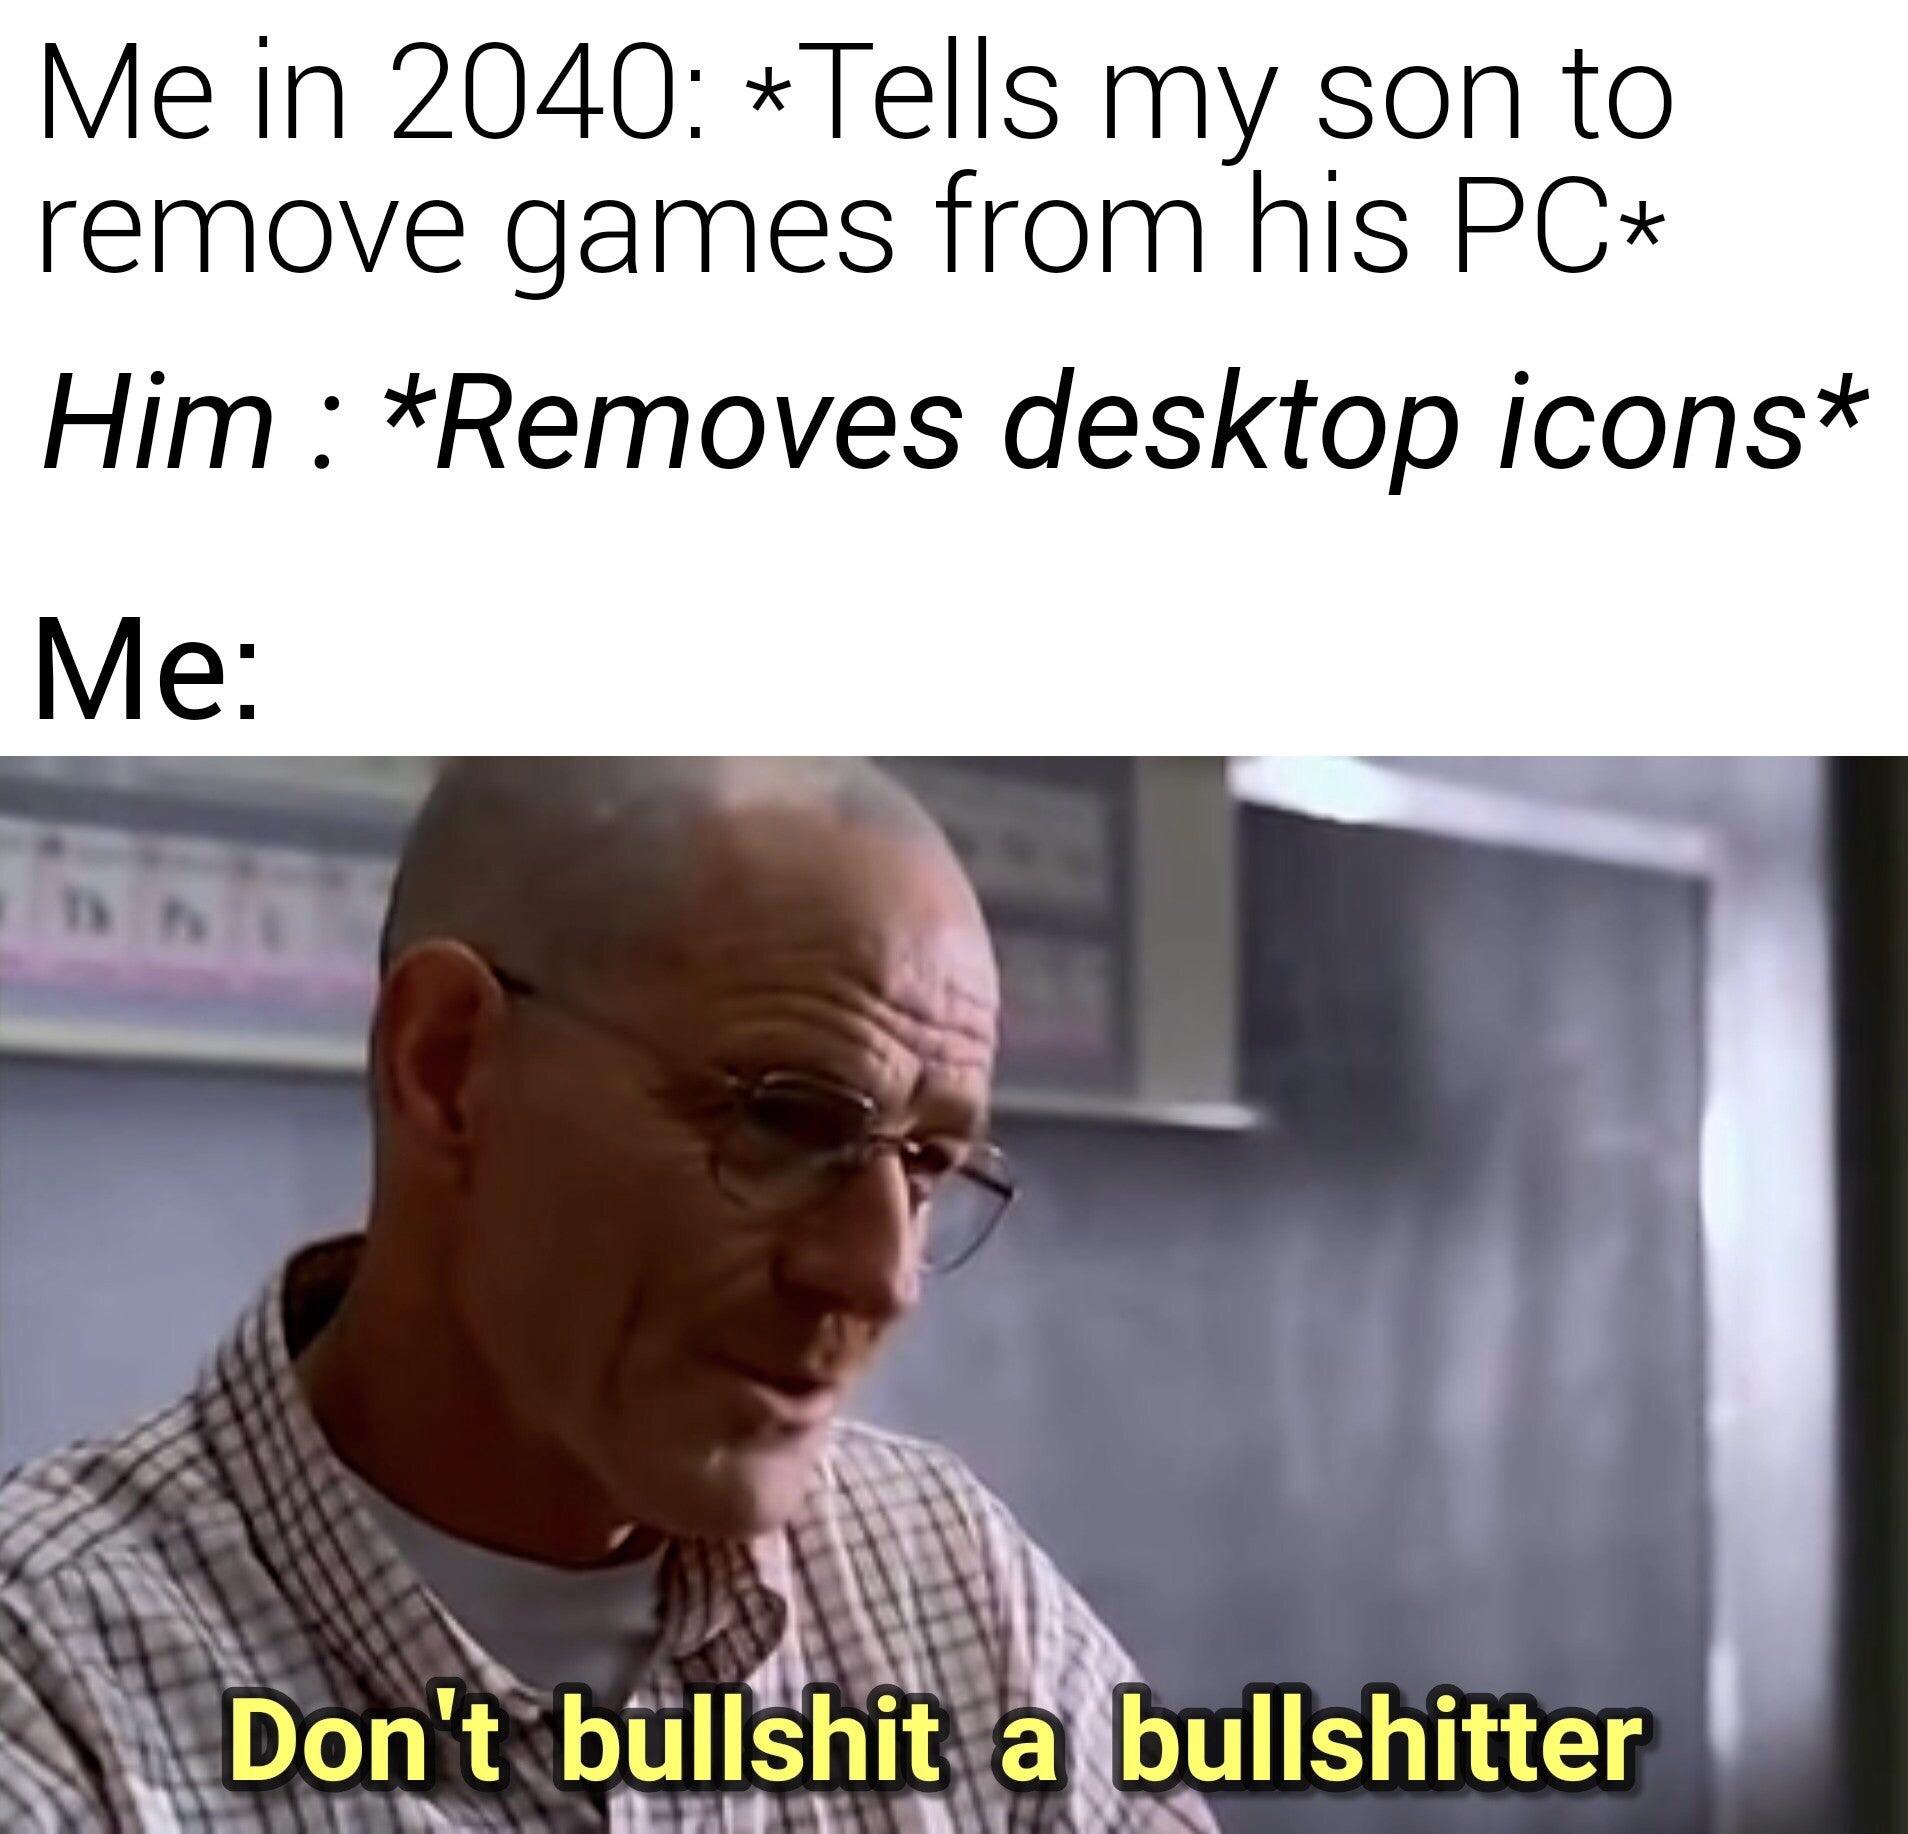 funny gaming memes - me and my son meme in 2040 game - Me in 2040 Tells my son to remove games from his Pc Him Removes desktop icons Me T Don't bullshit a bullshitter